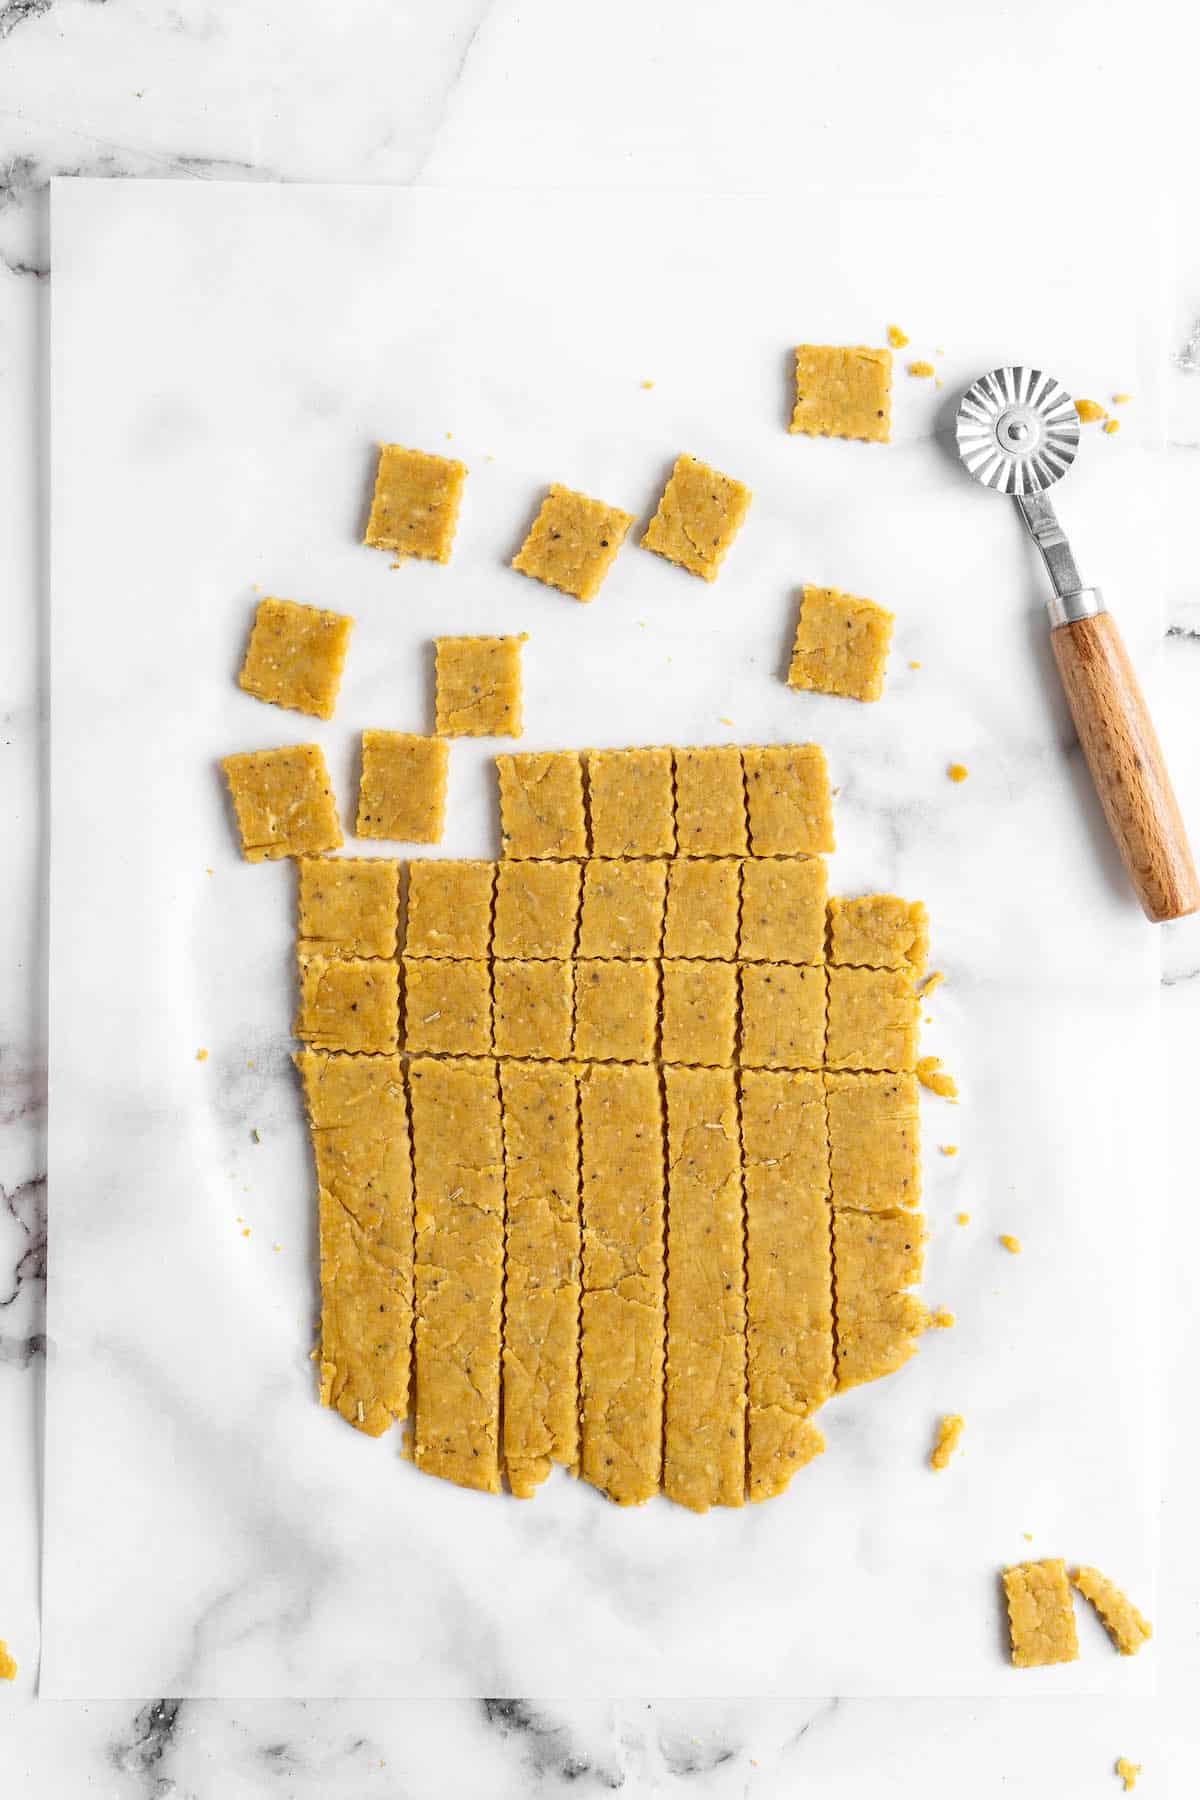 Overhead view showing vegan cheese crackers being cut